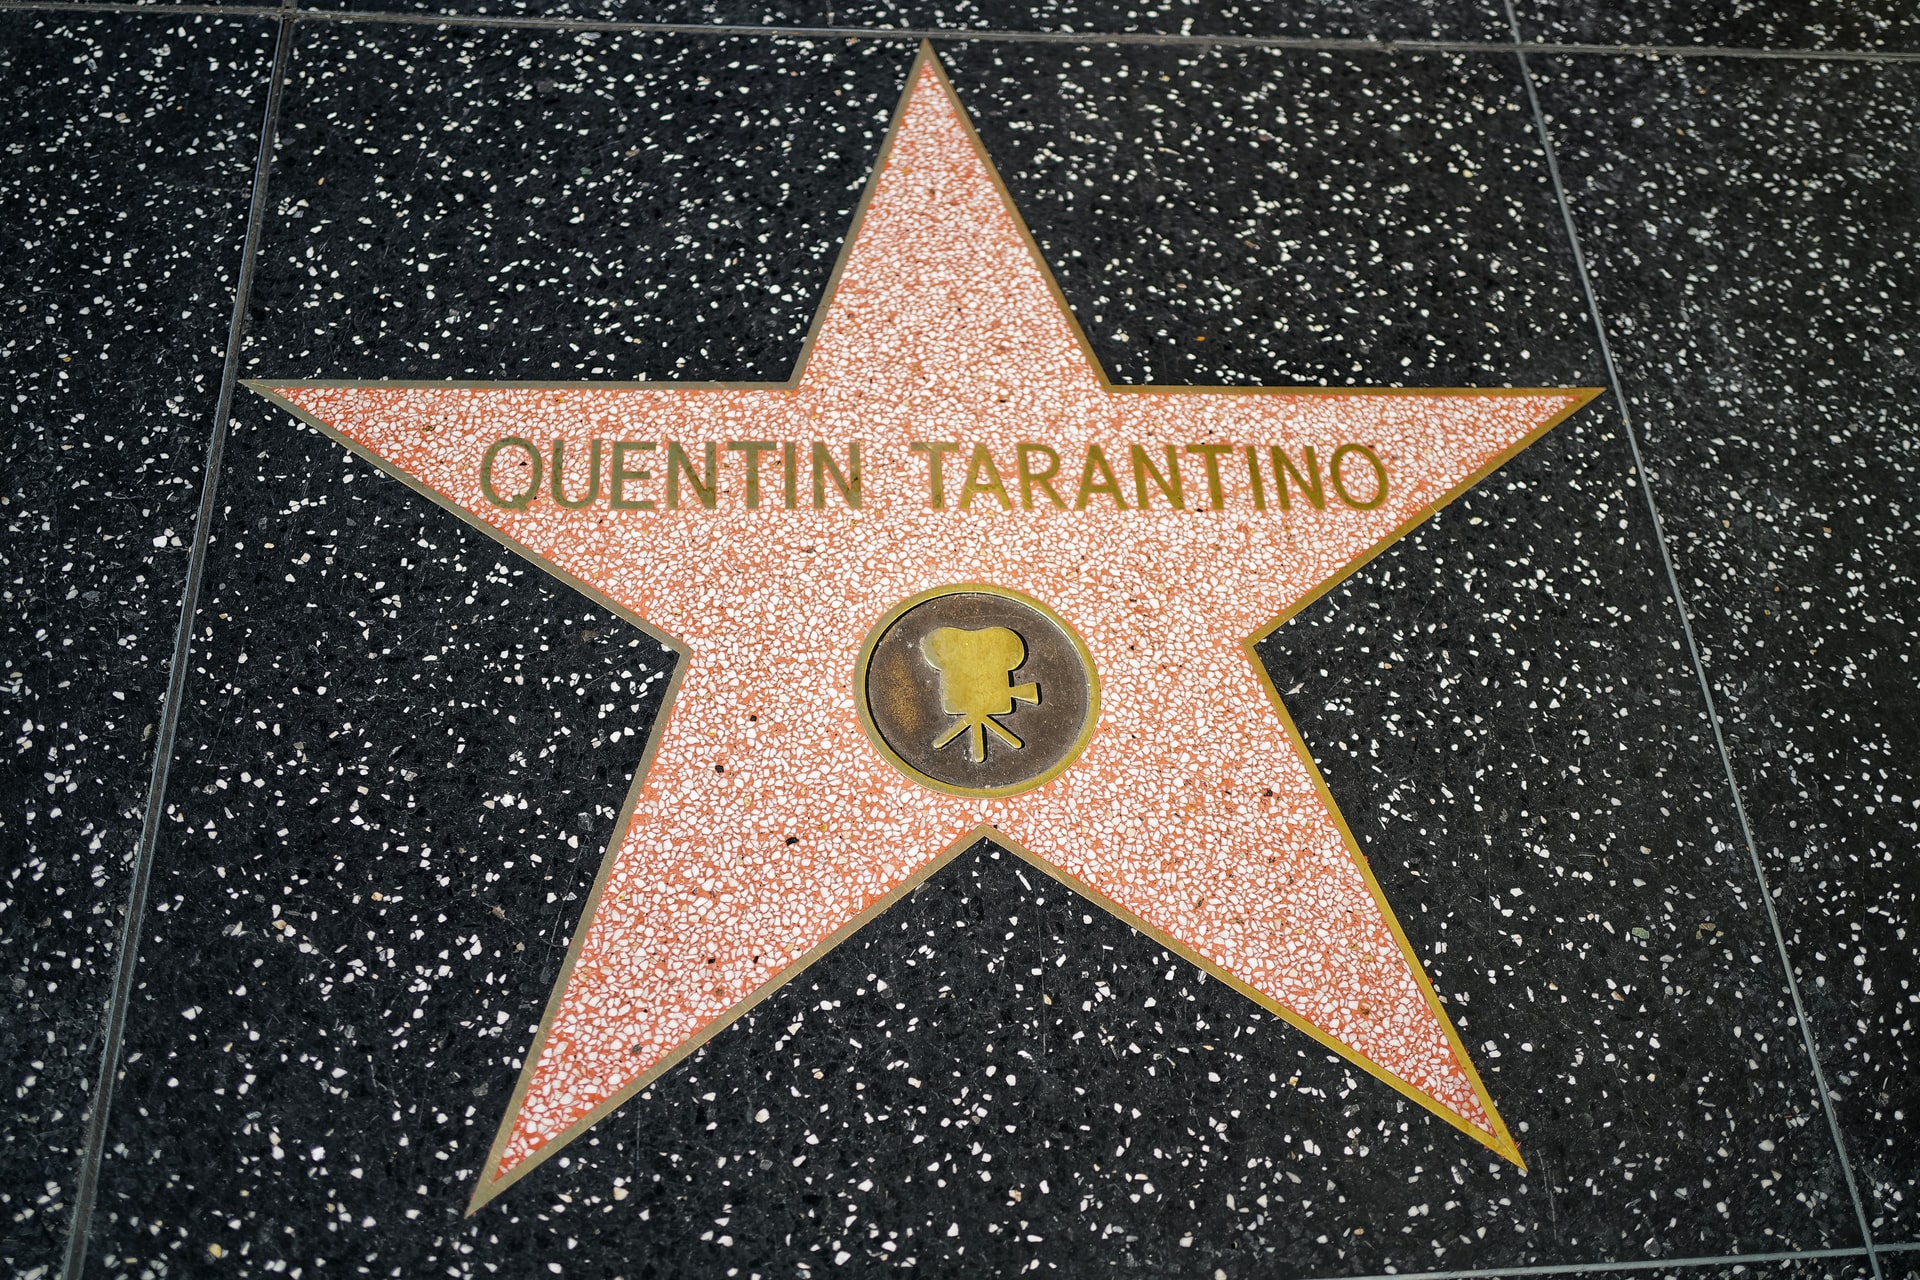 Quentin's star on the Hollywood walk of fame